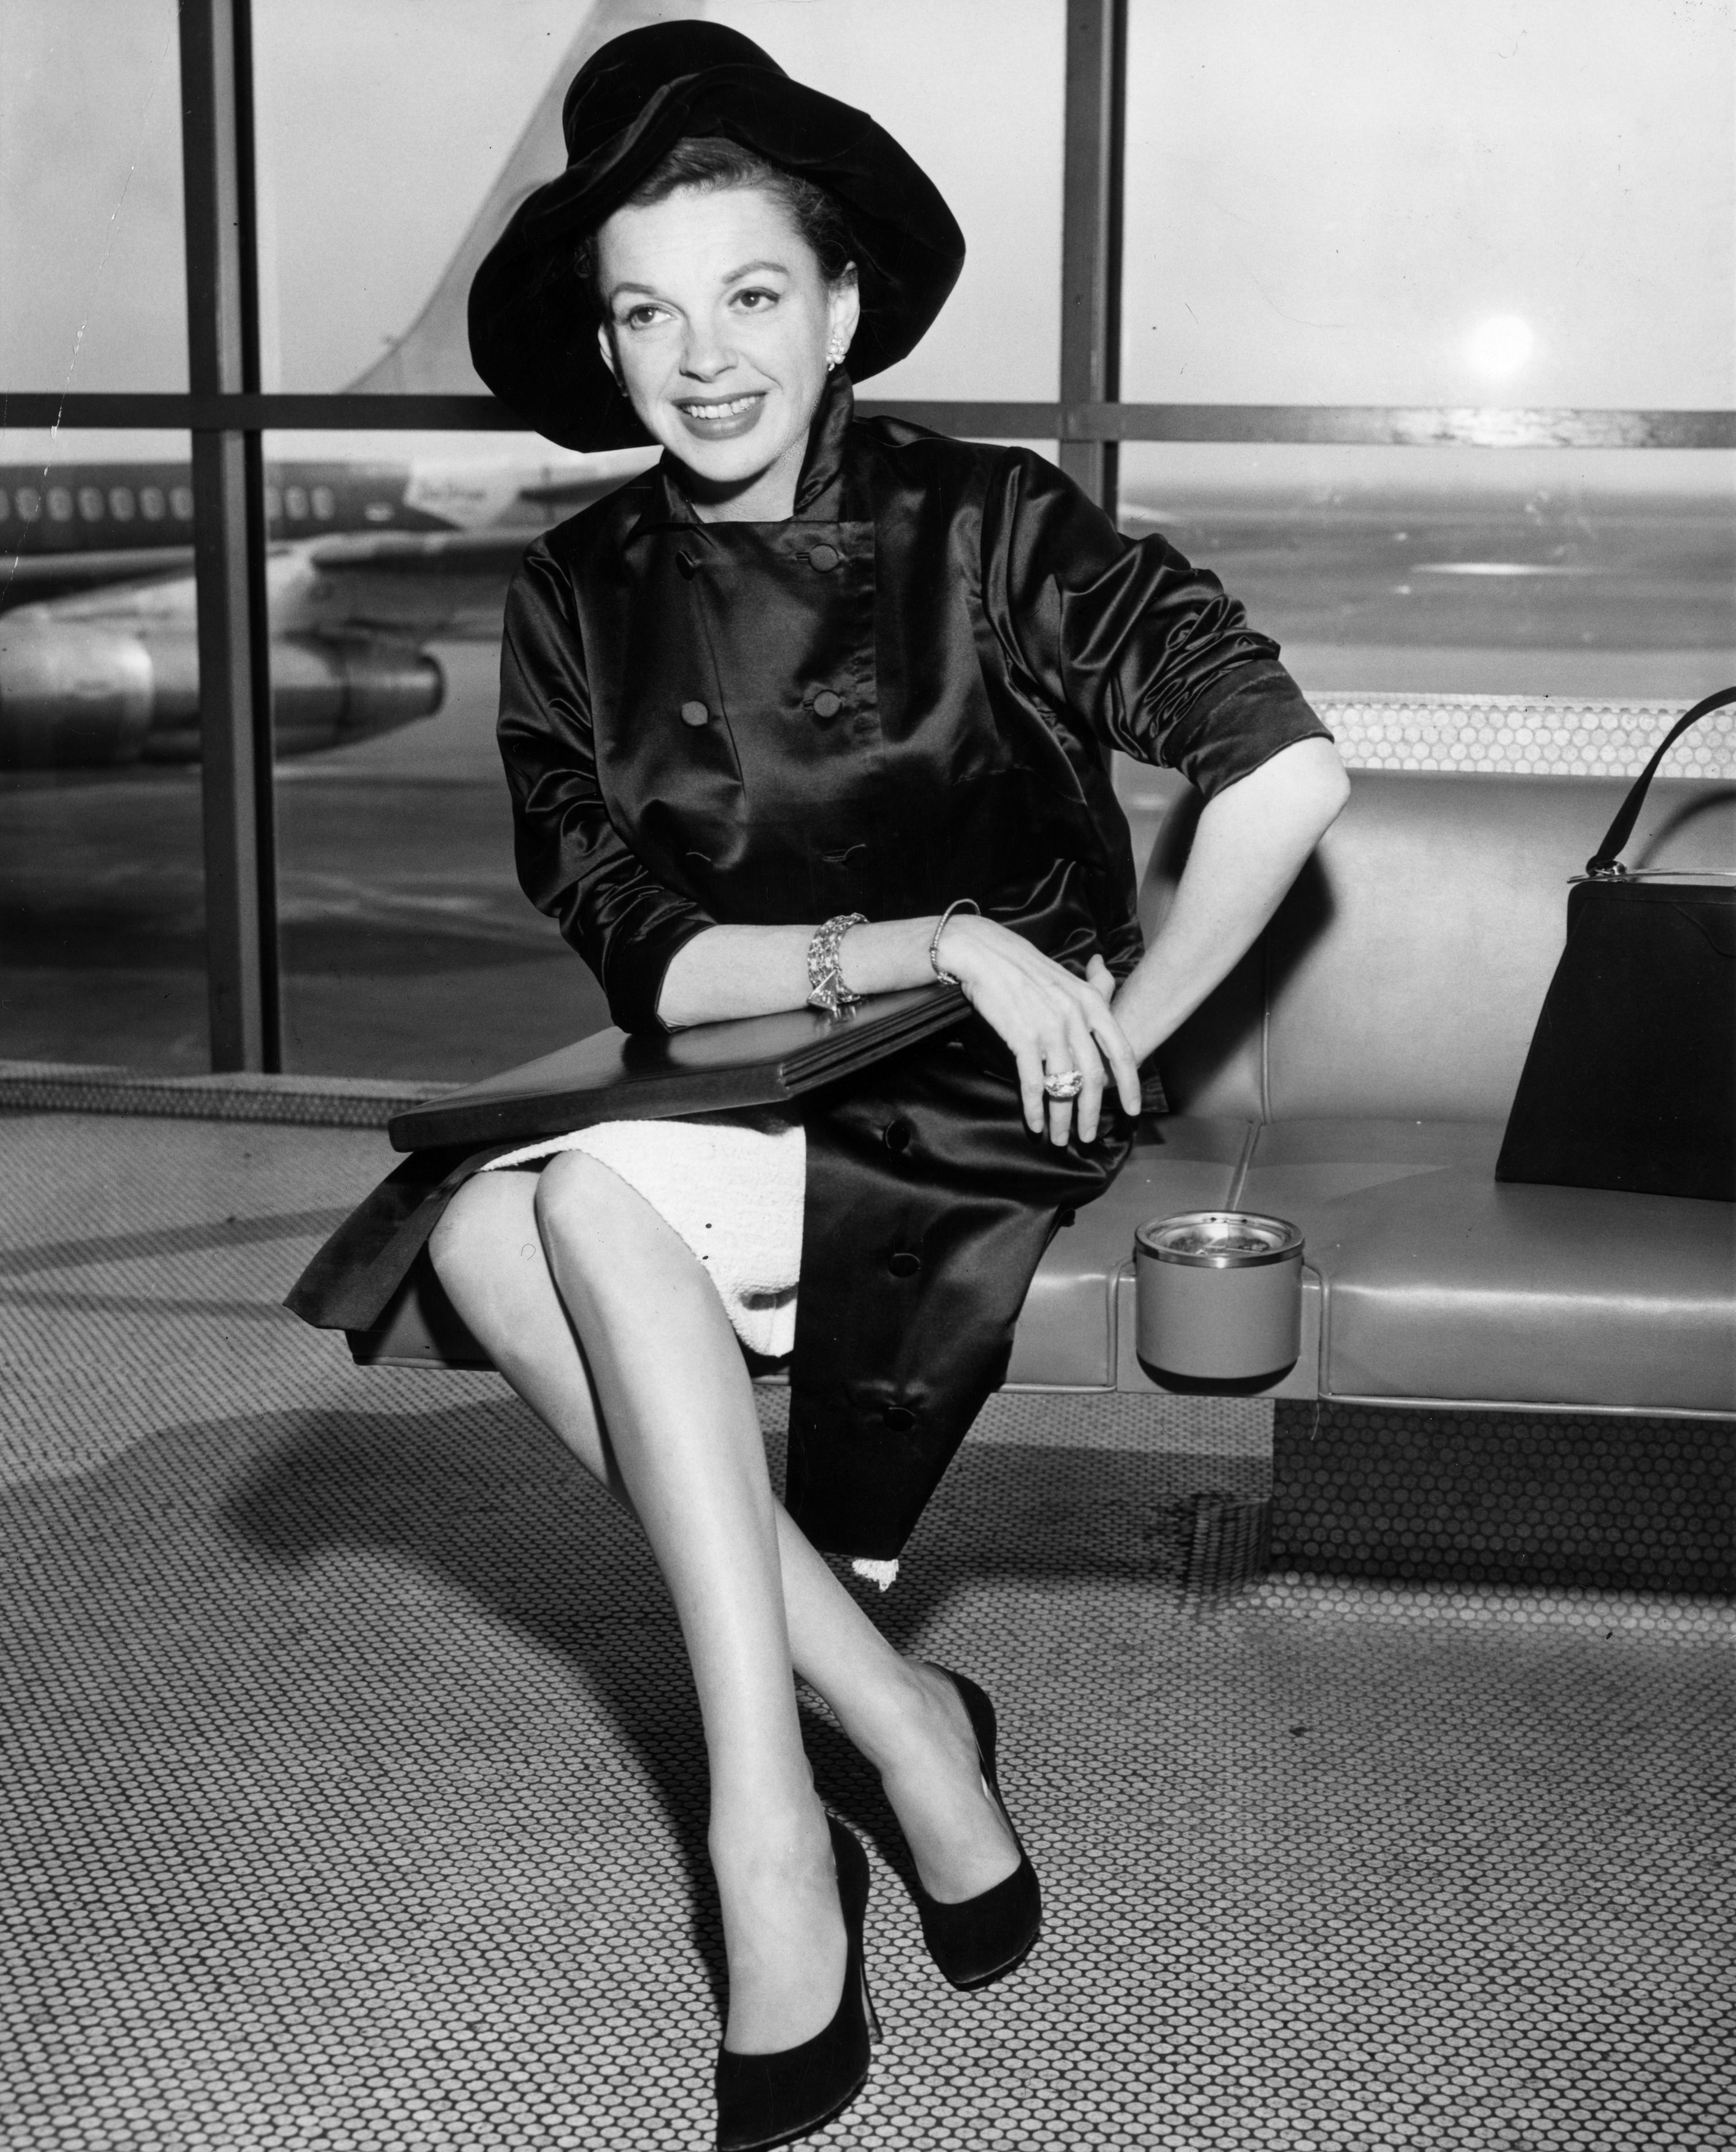 Singer and film star Judy Garland at an airport on January 01, 1955 | Photo: Getty Images